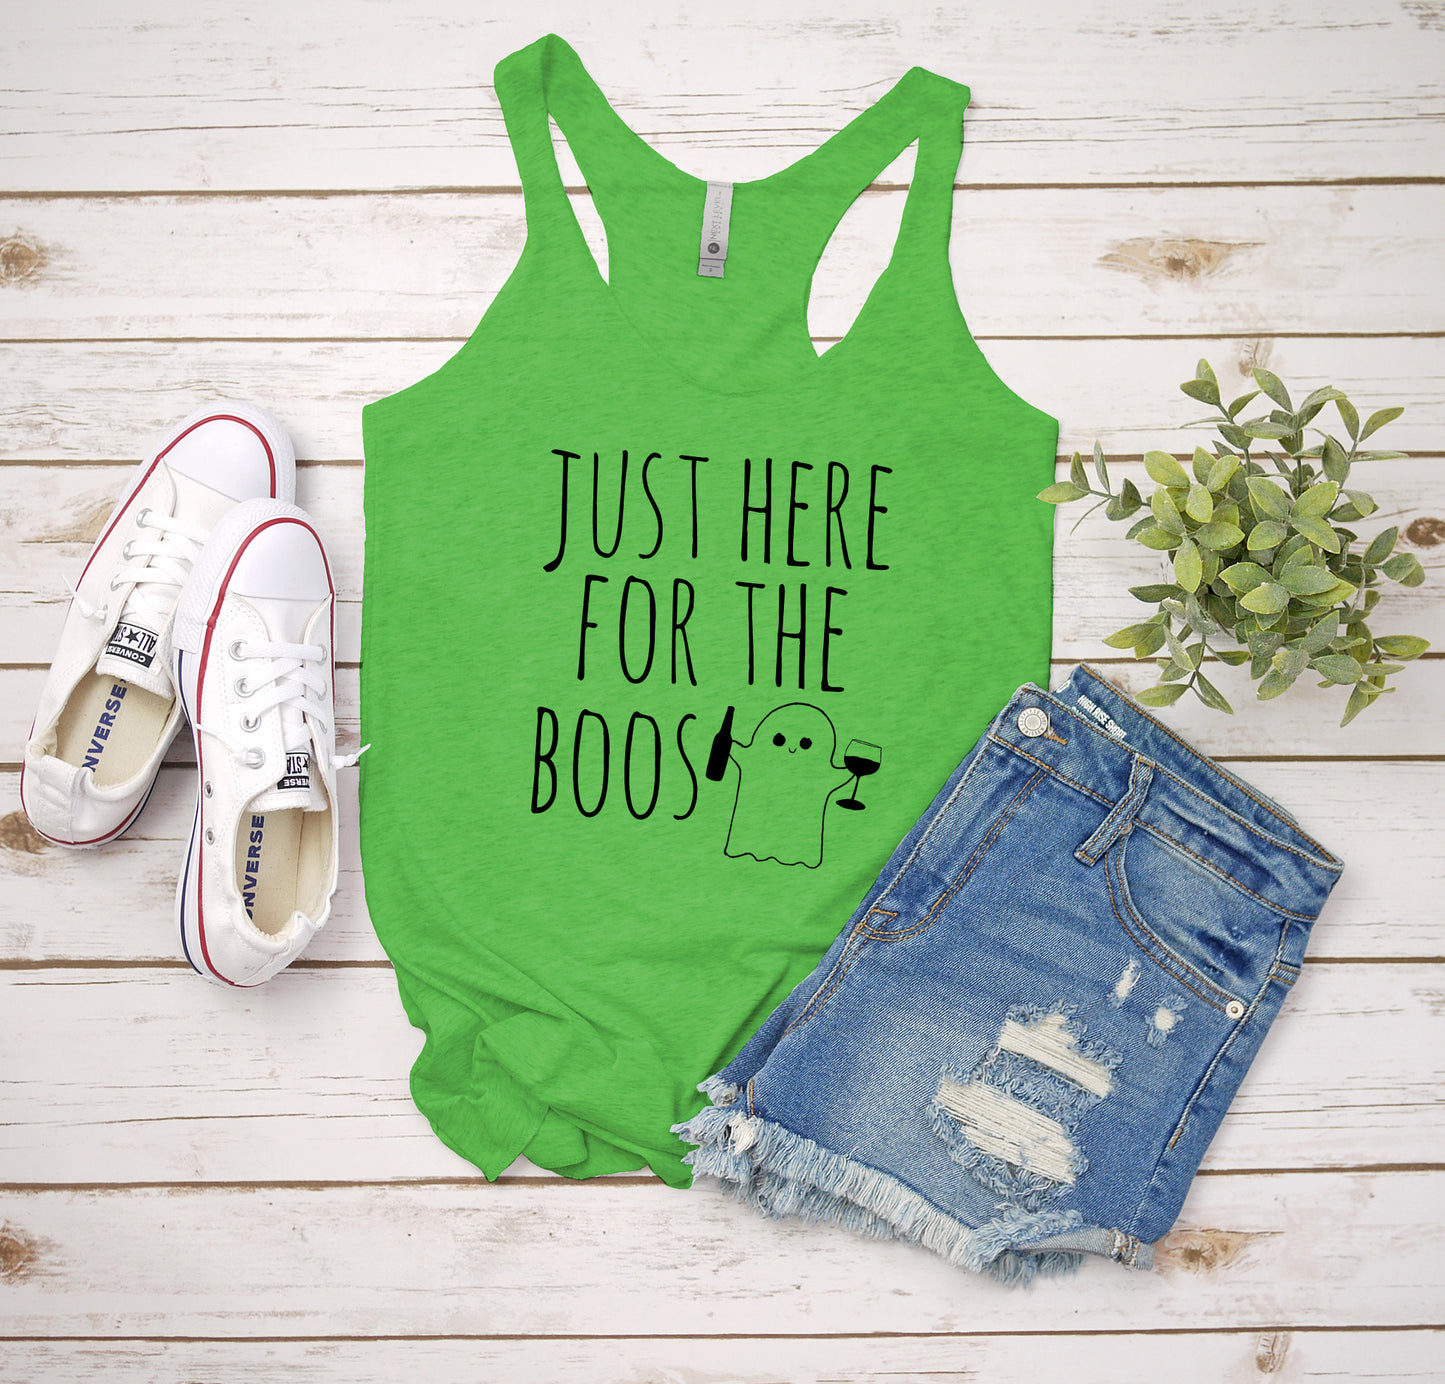 Just Here For The Boos (Halloween) - Women's Tank - Heather Gray, Tahiti, or Envy